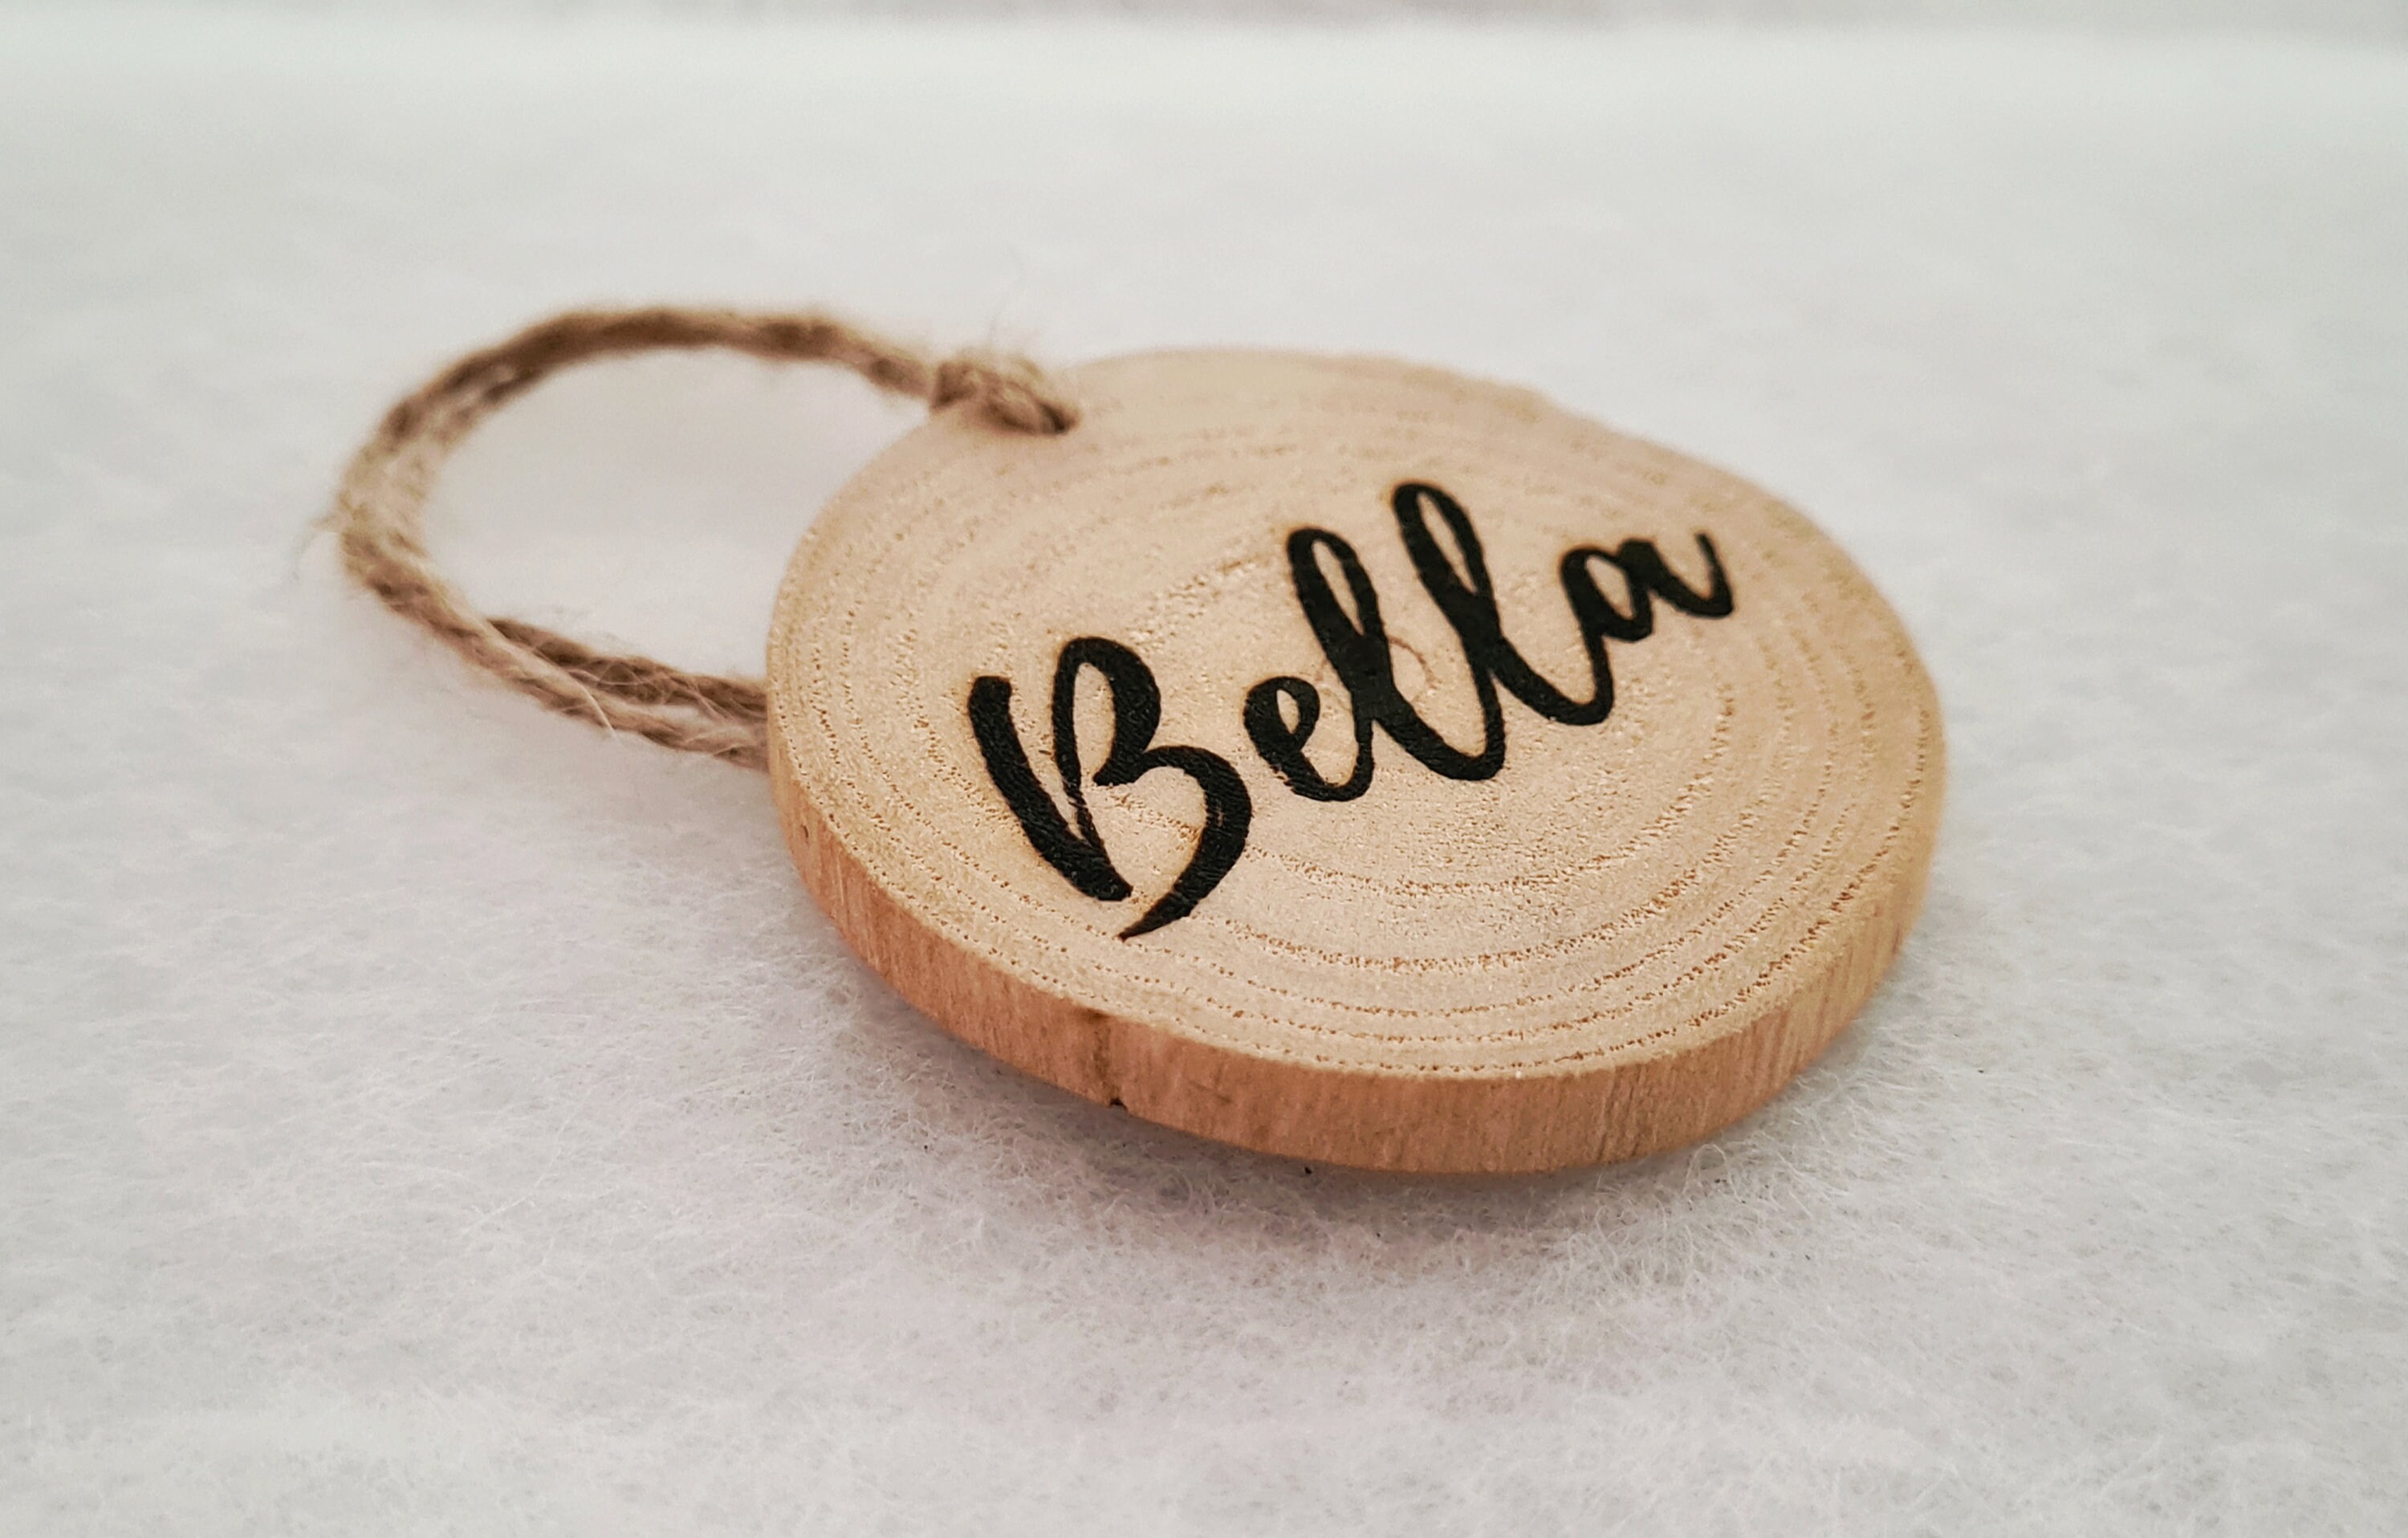 5 Years Down & I Still WOOD 5th Wedding Anniversary Gifts for Him Her Men  Cheeky Wooden Unique Husband Wife Keyring Love Funny Fun Presents 